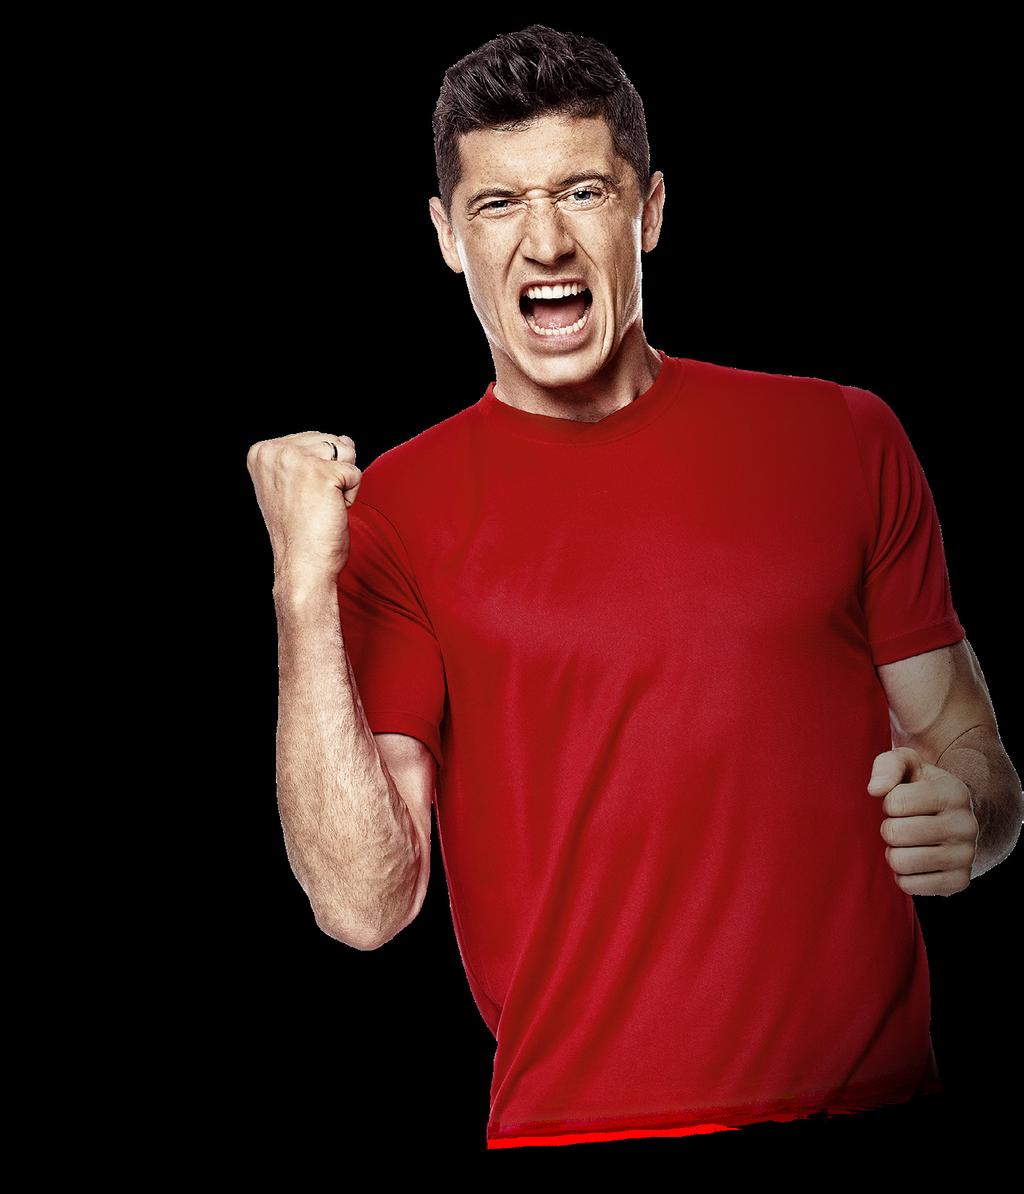 RAL ROBERT LEWANDOWSKI Real power! is one of the best known football players in the world.